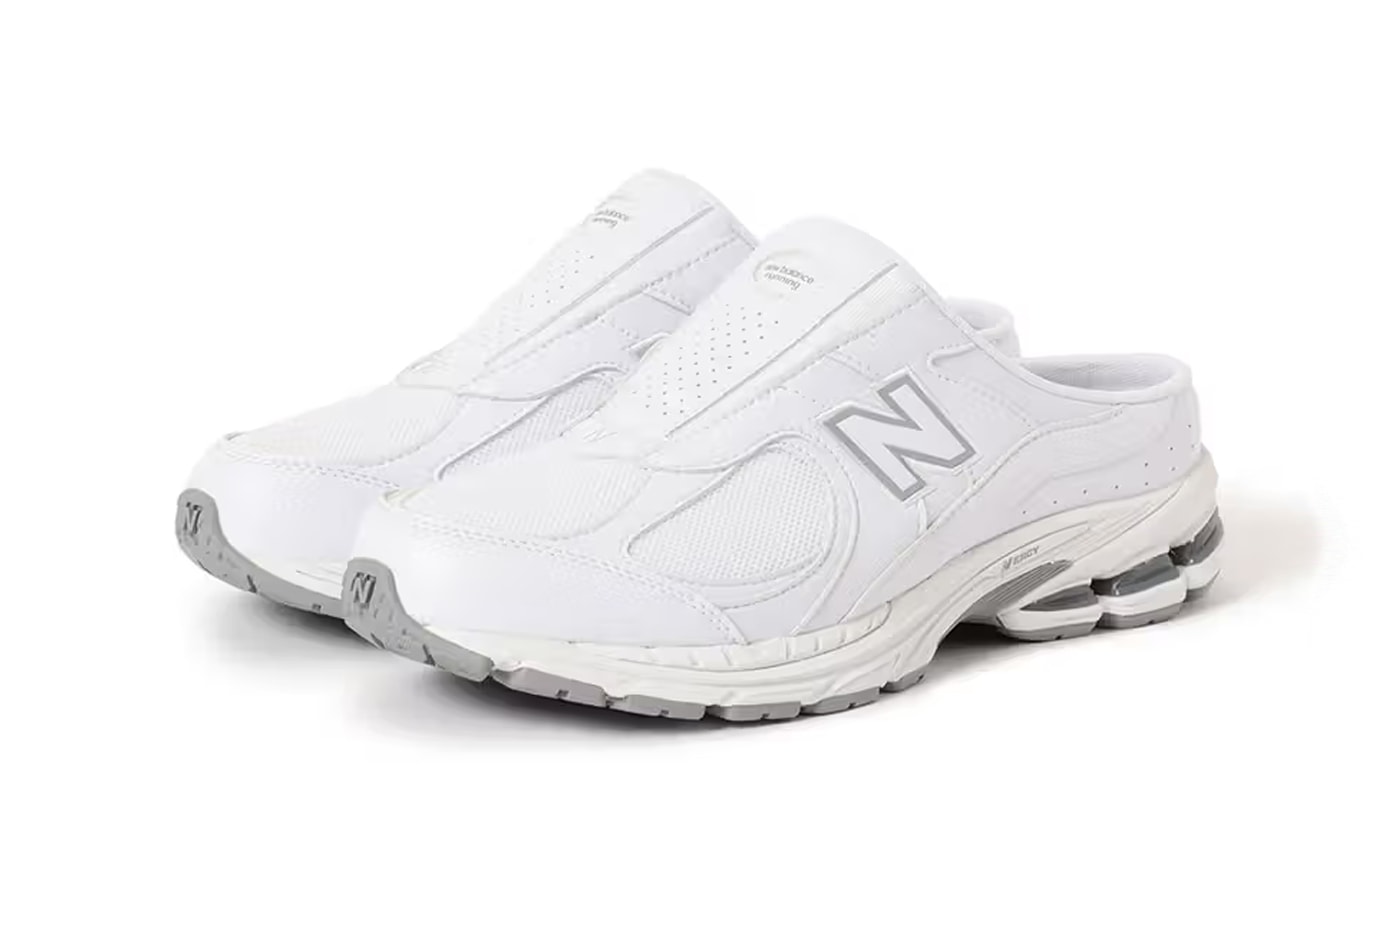 beams new balance 2002r mule white gray release date info store list buying guide photos price 